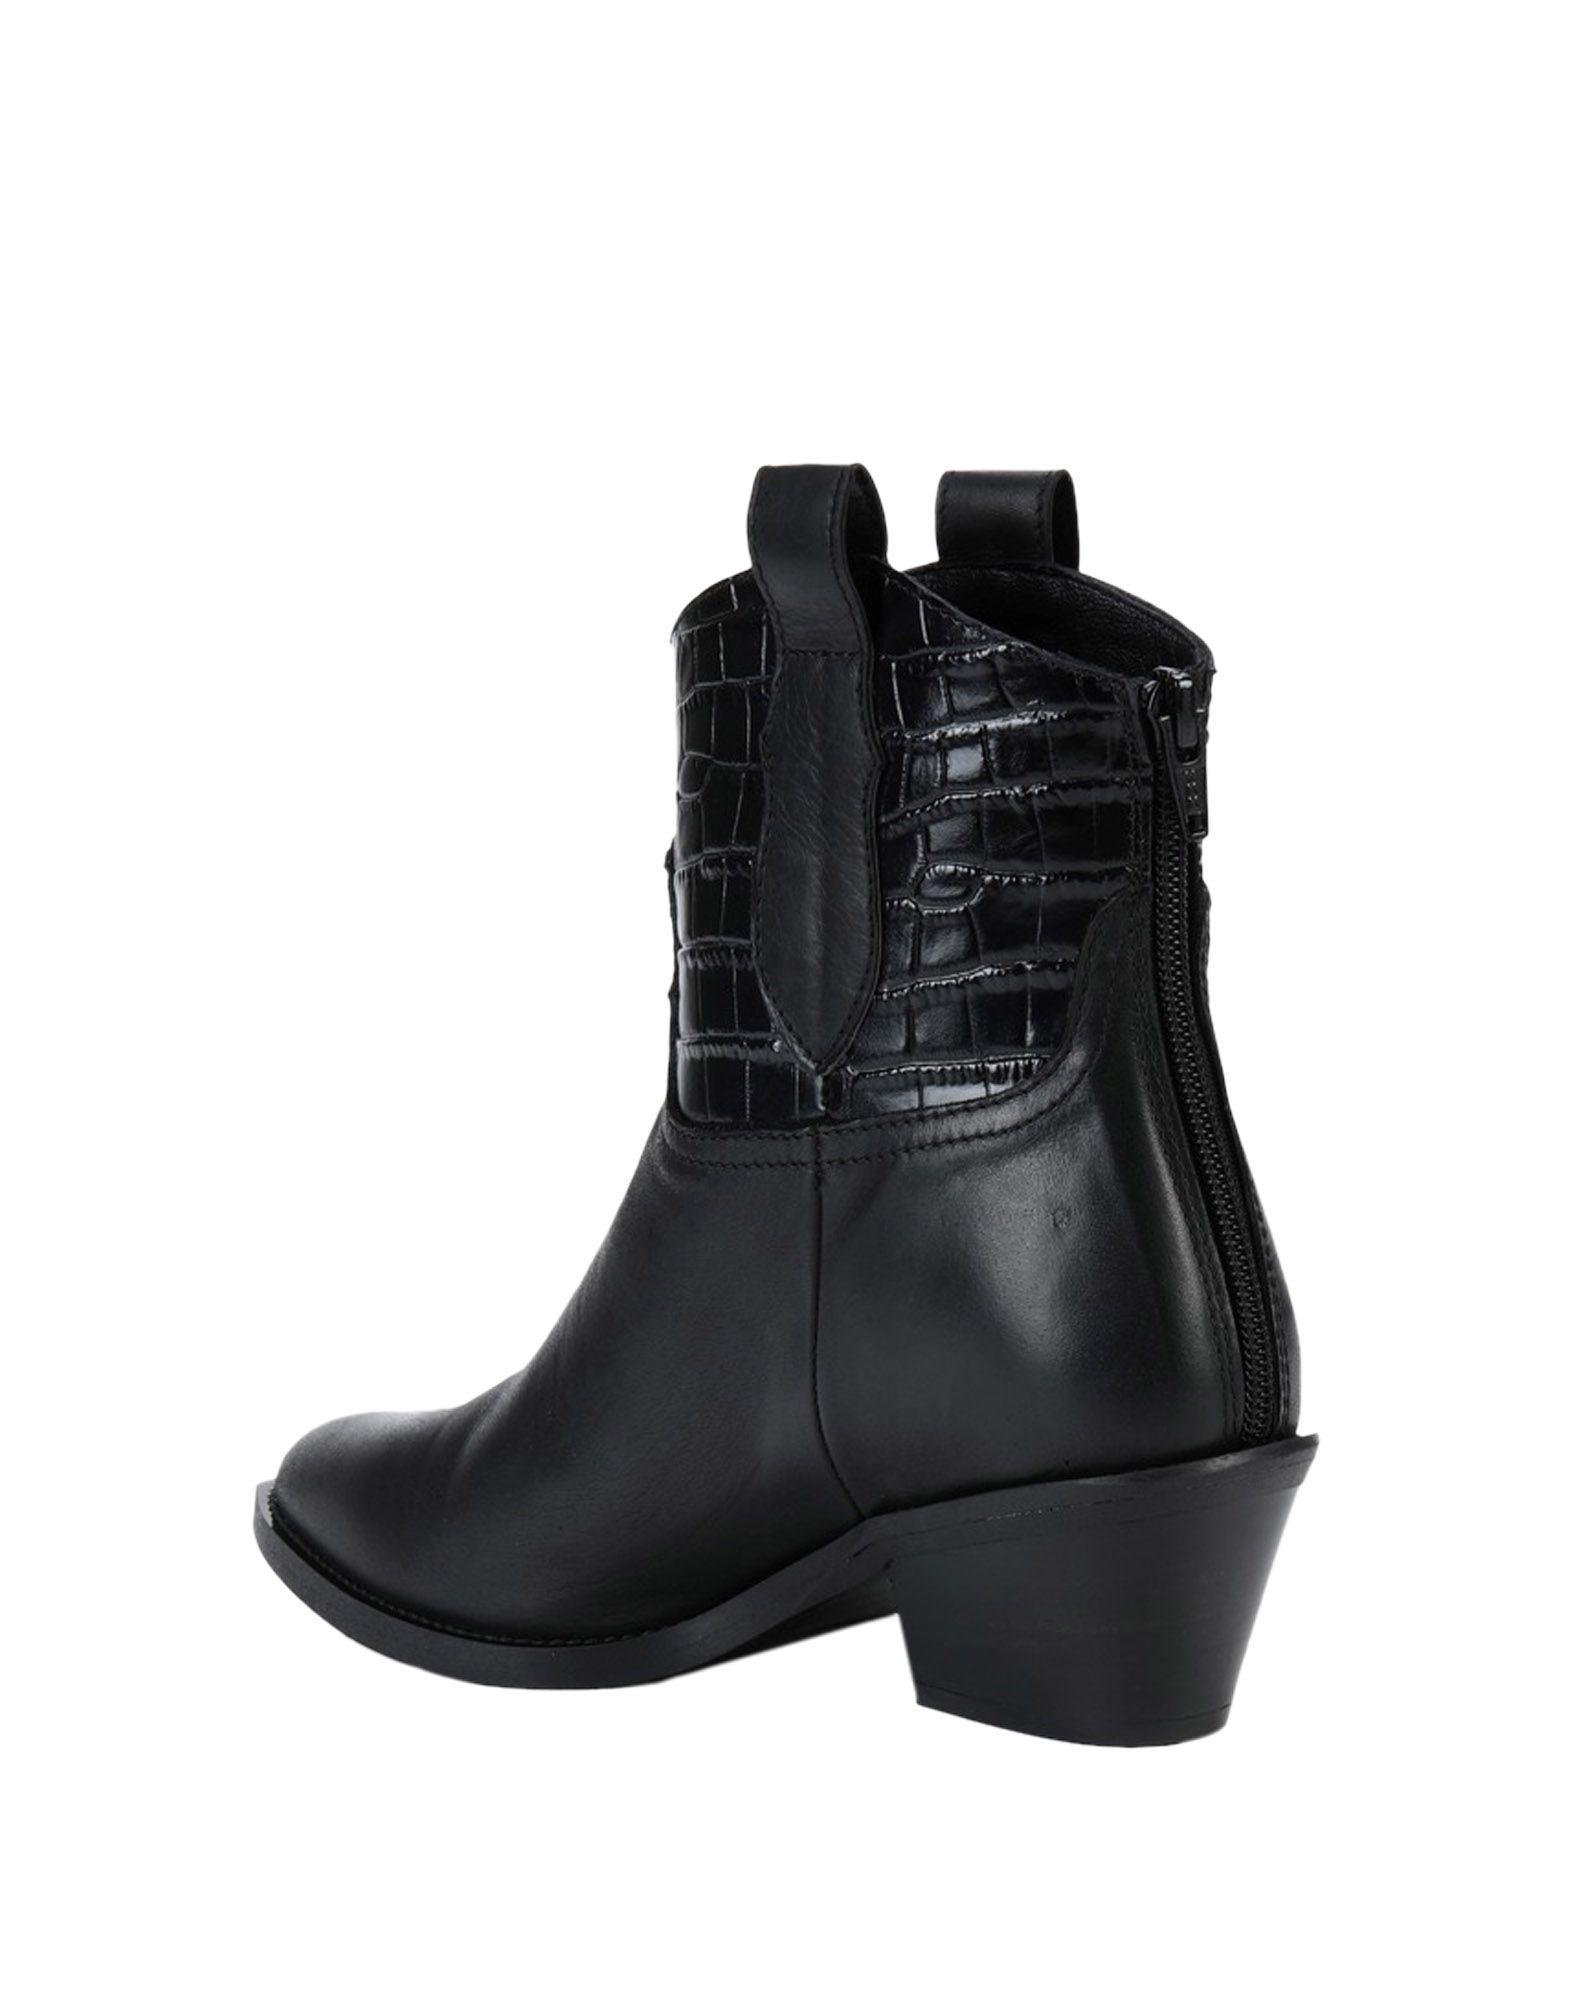 Marc Ellis Leather Ankle Boots in Black - Lyst